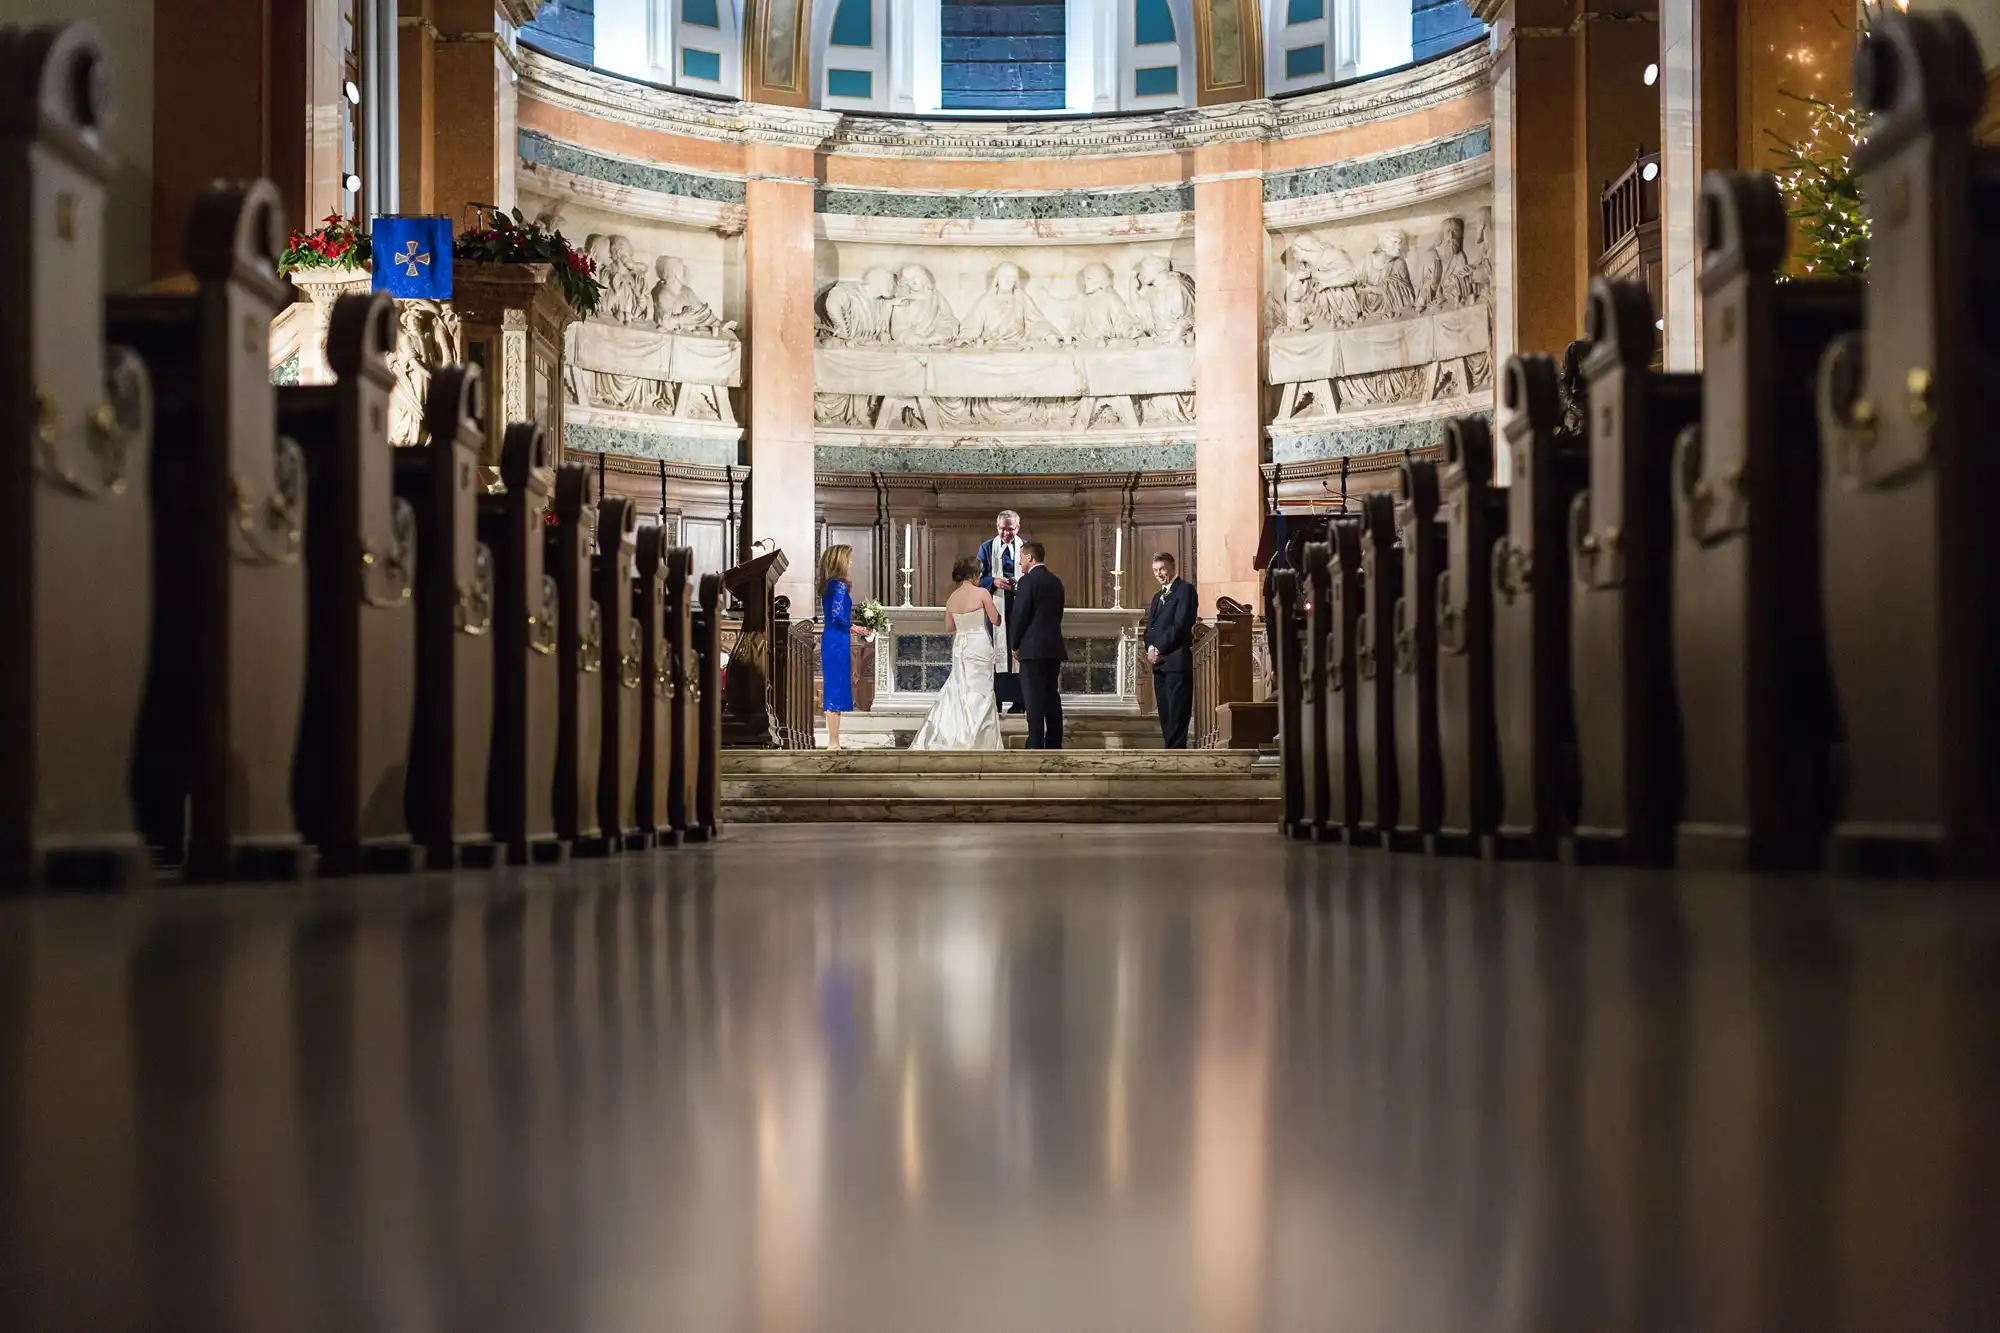 Wedding ceremony in a church, viewed between rows of pews, focusing on a couple at the altar with a few guests and eu flag visible.